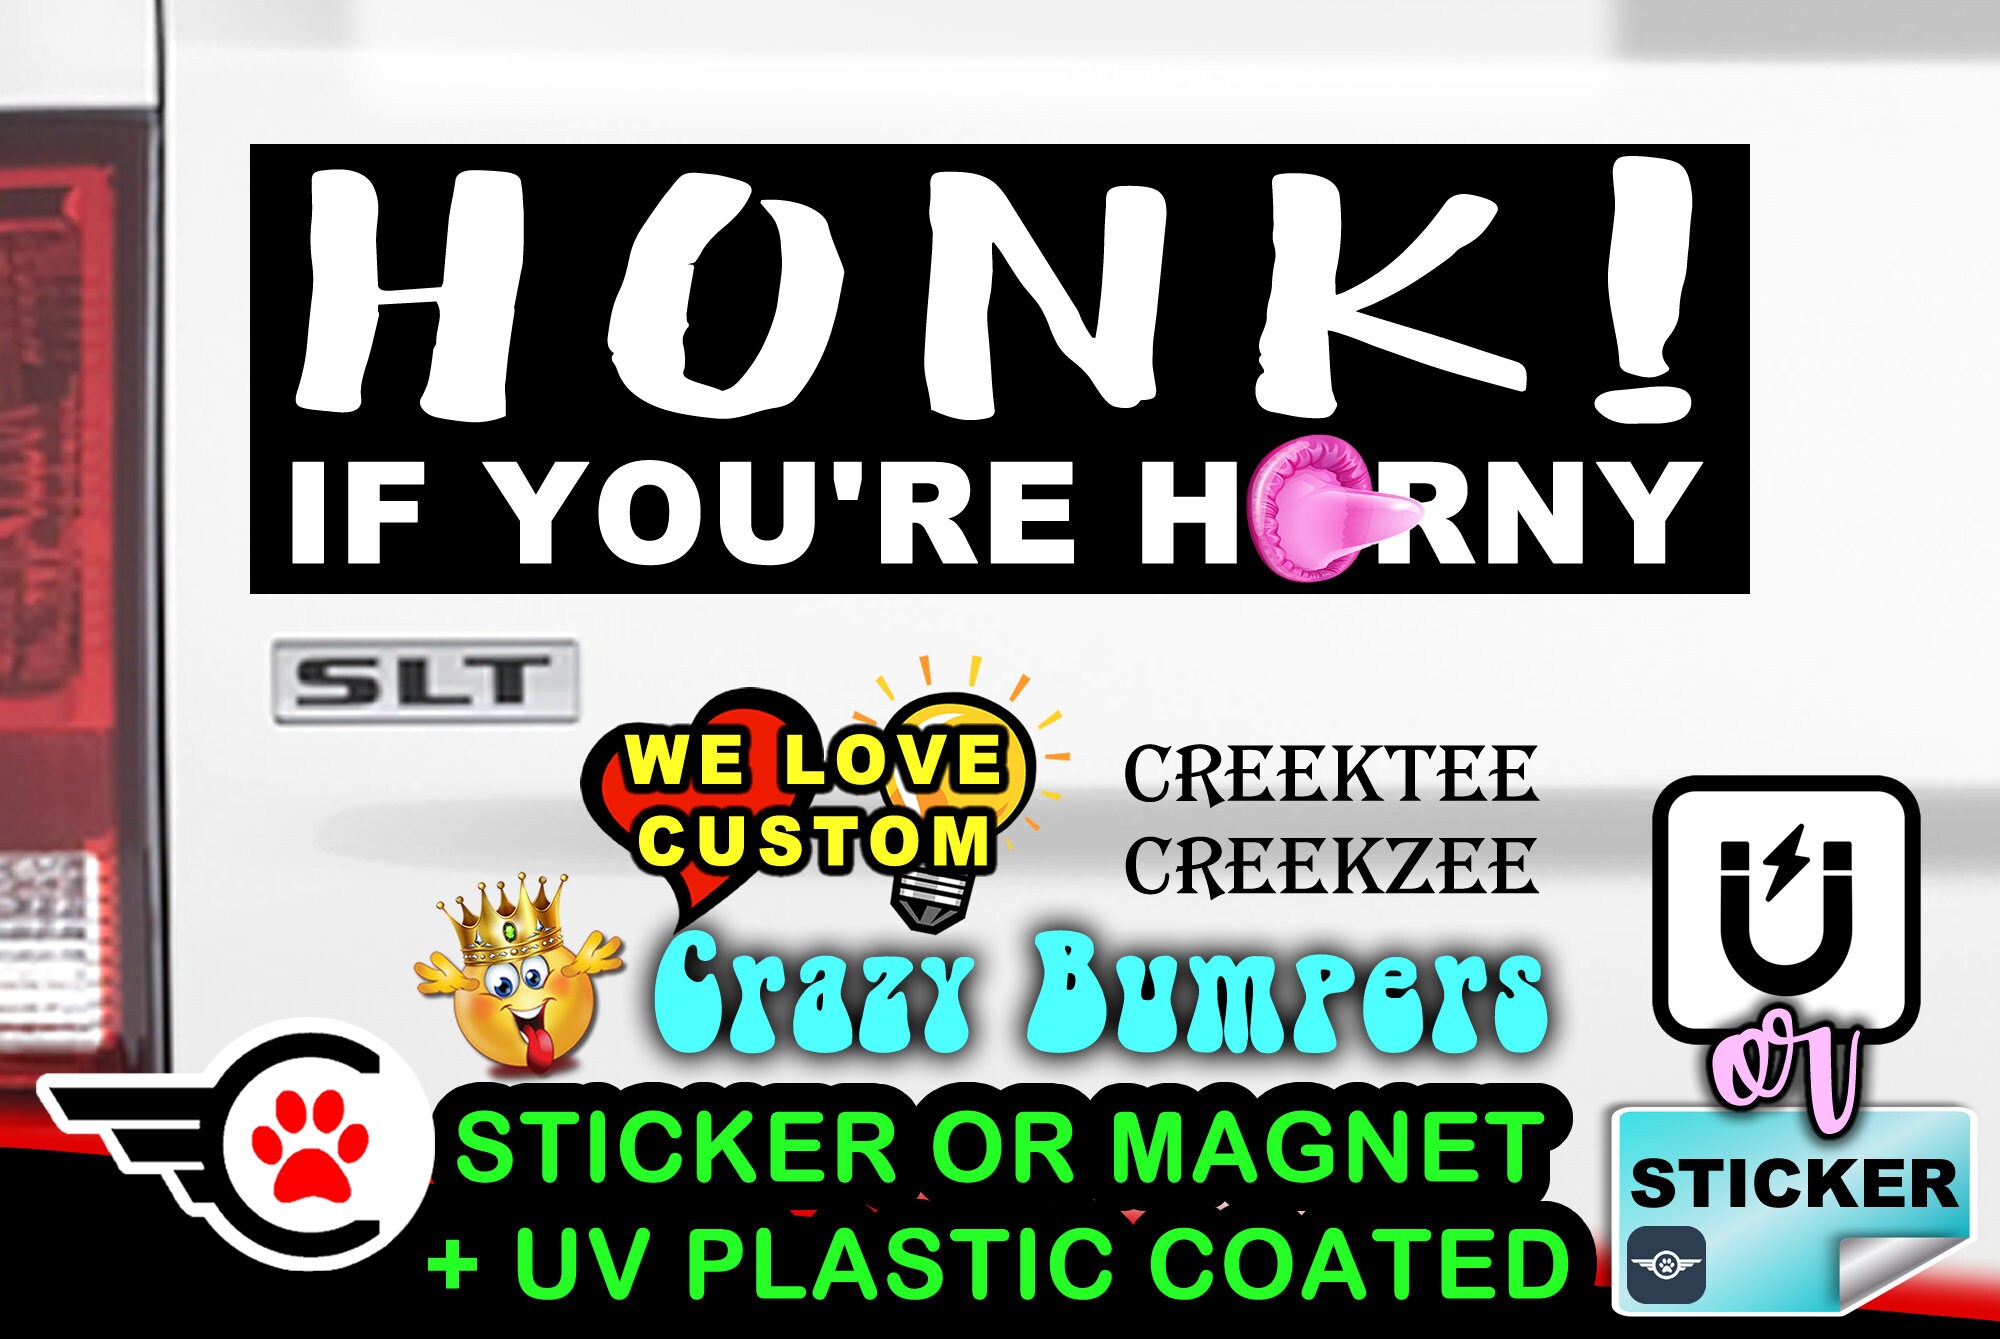 HONK if you're horny  10 x 3 Sticker Magnet or Shiny reflective foil coating in both bumper sticker or bumper magnet